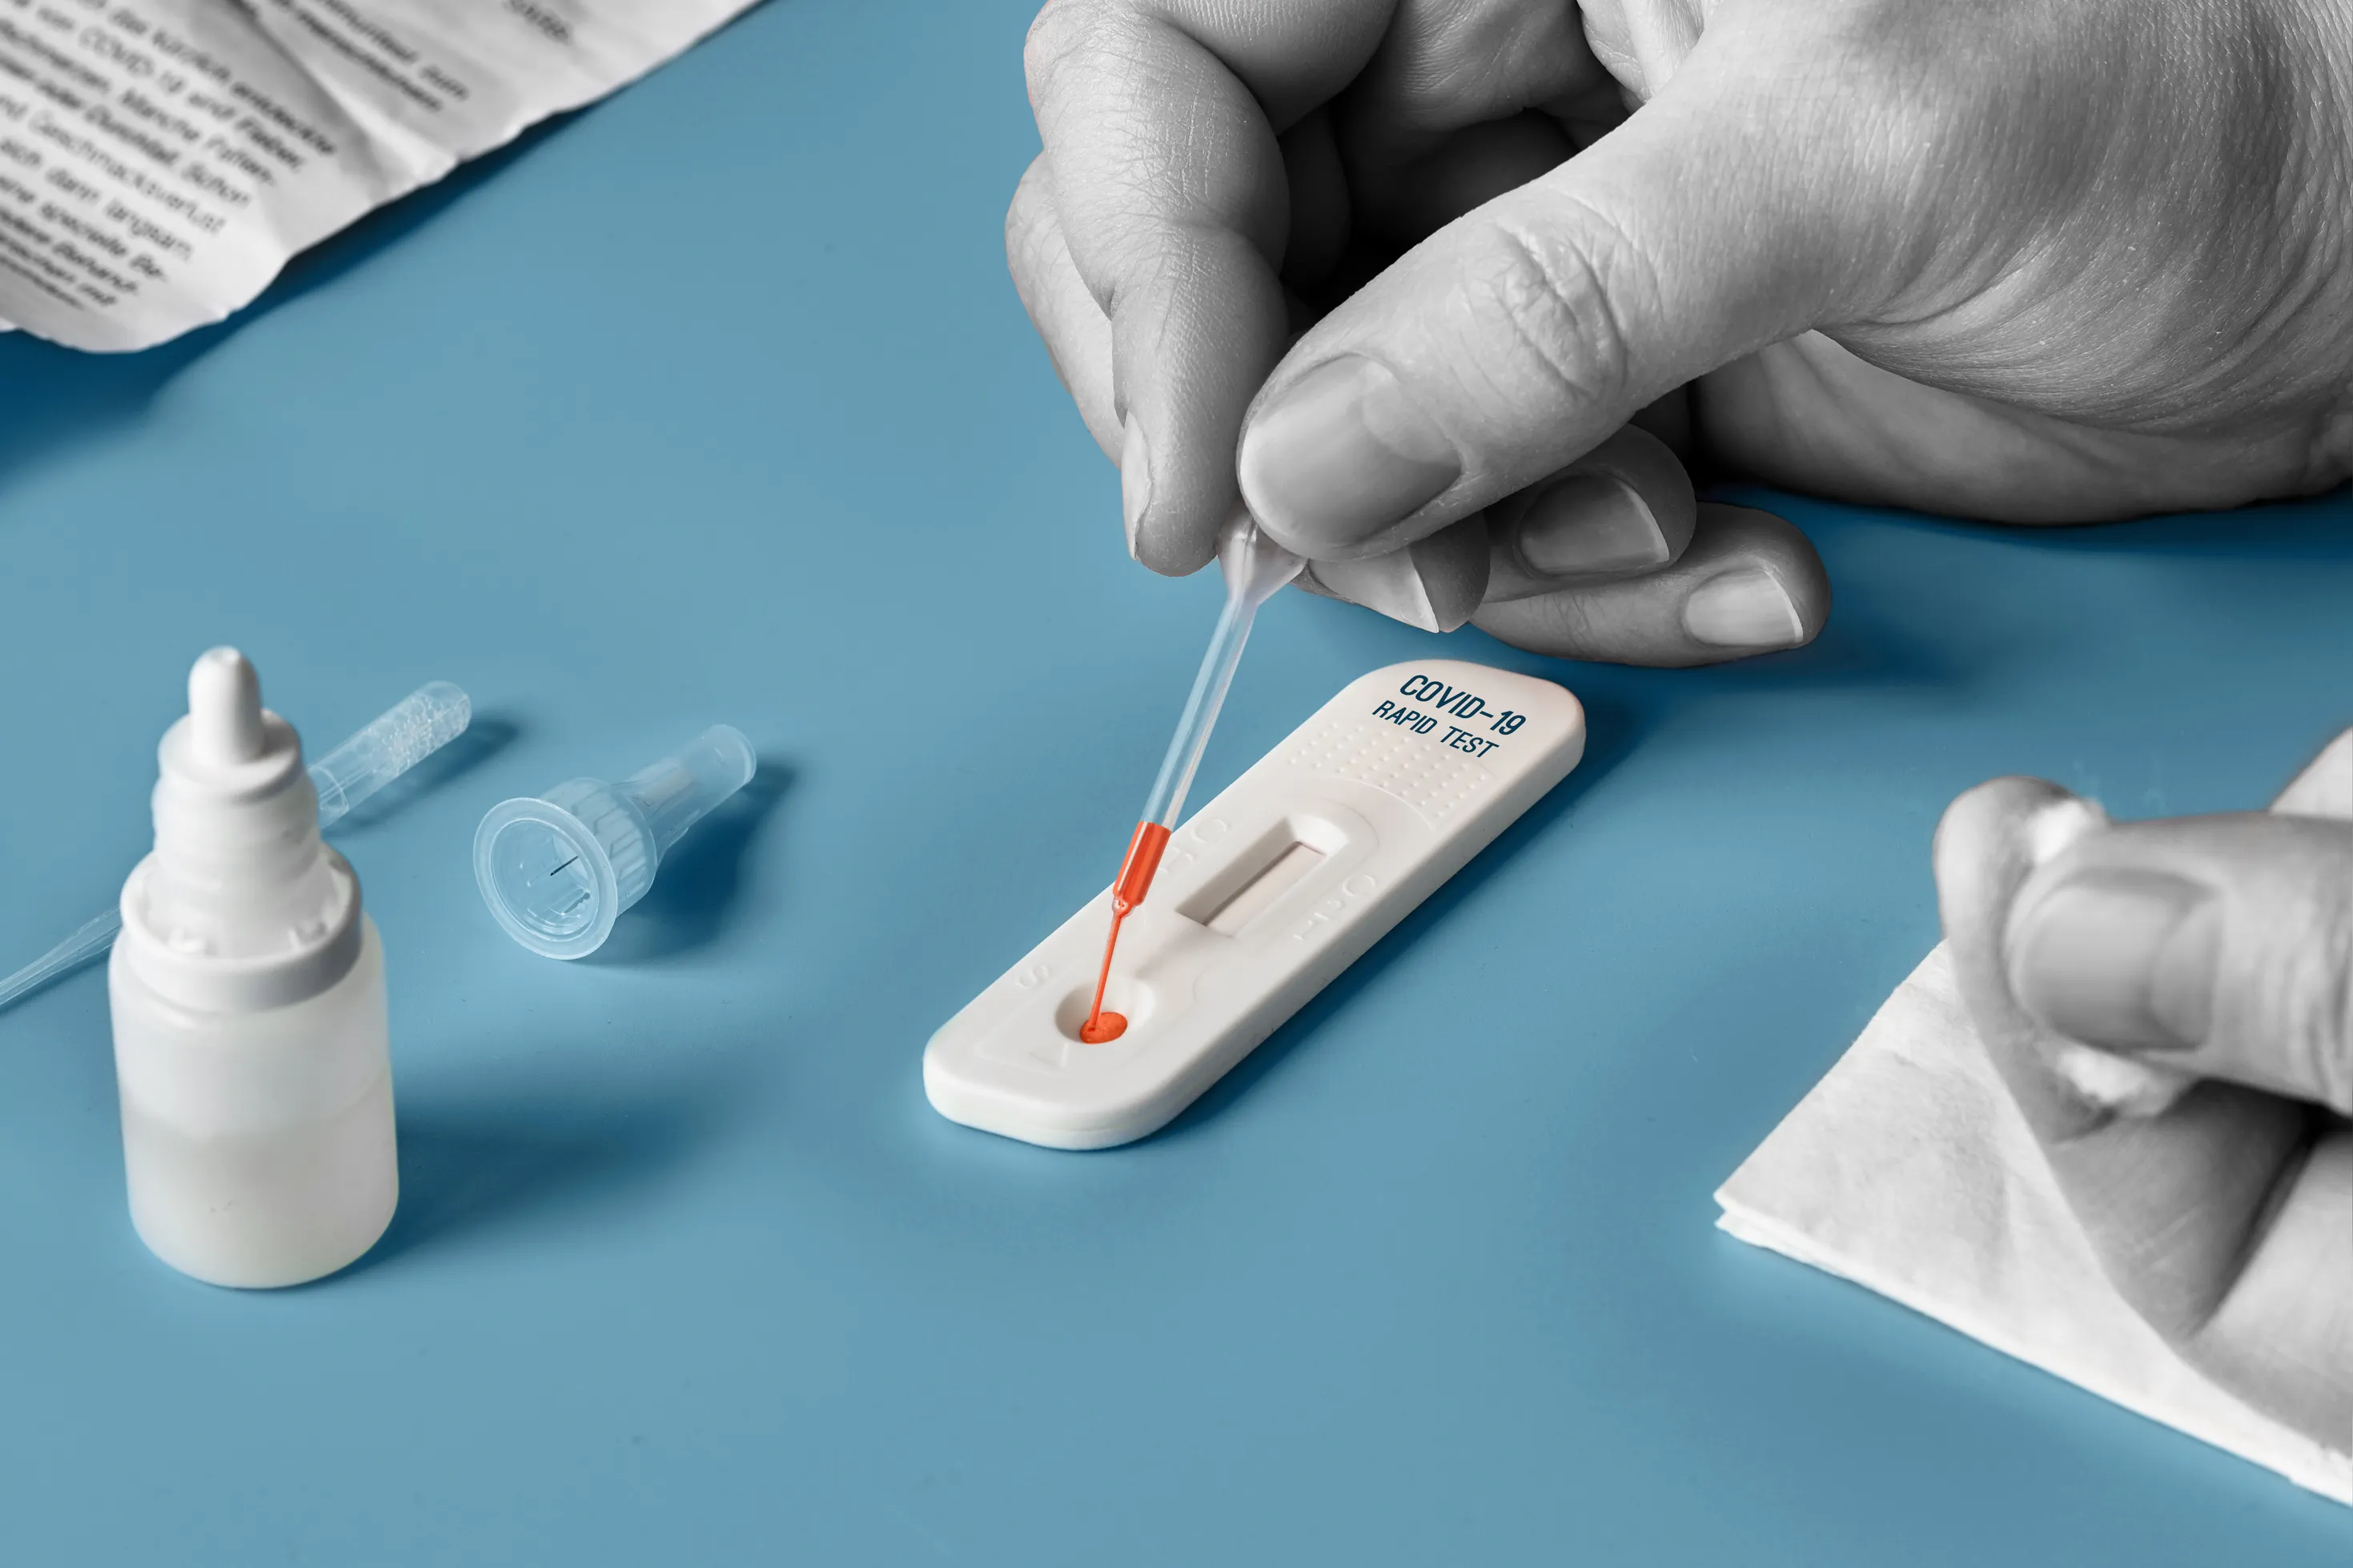 You Now Have to Pay Even Higher Prices for Some At-Home COVID-19 Test Kits